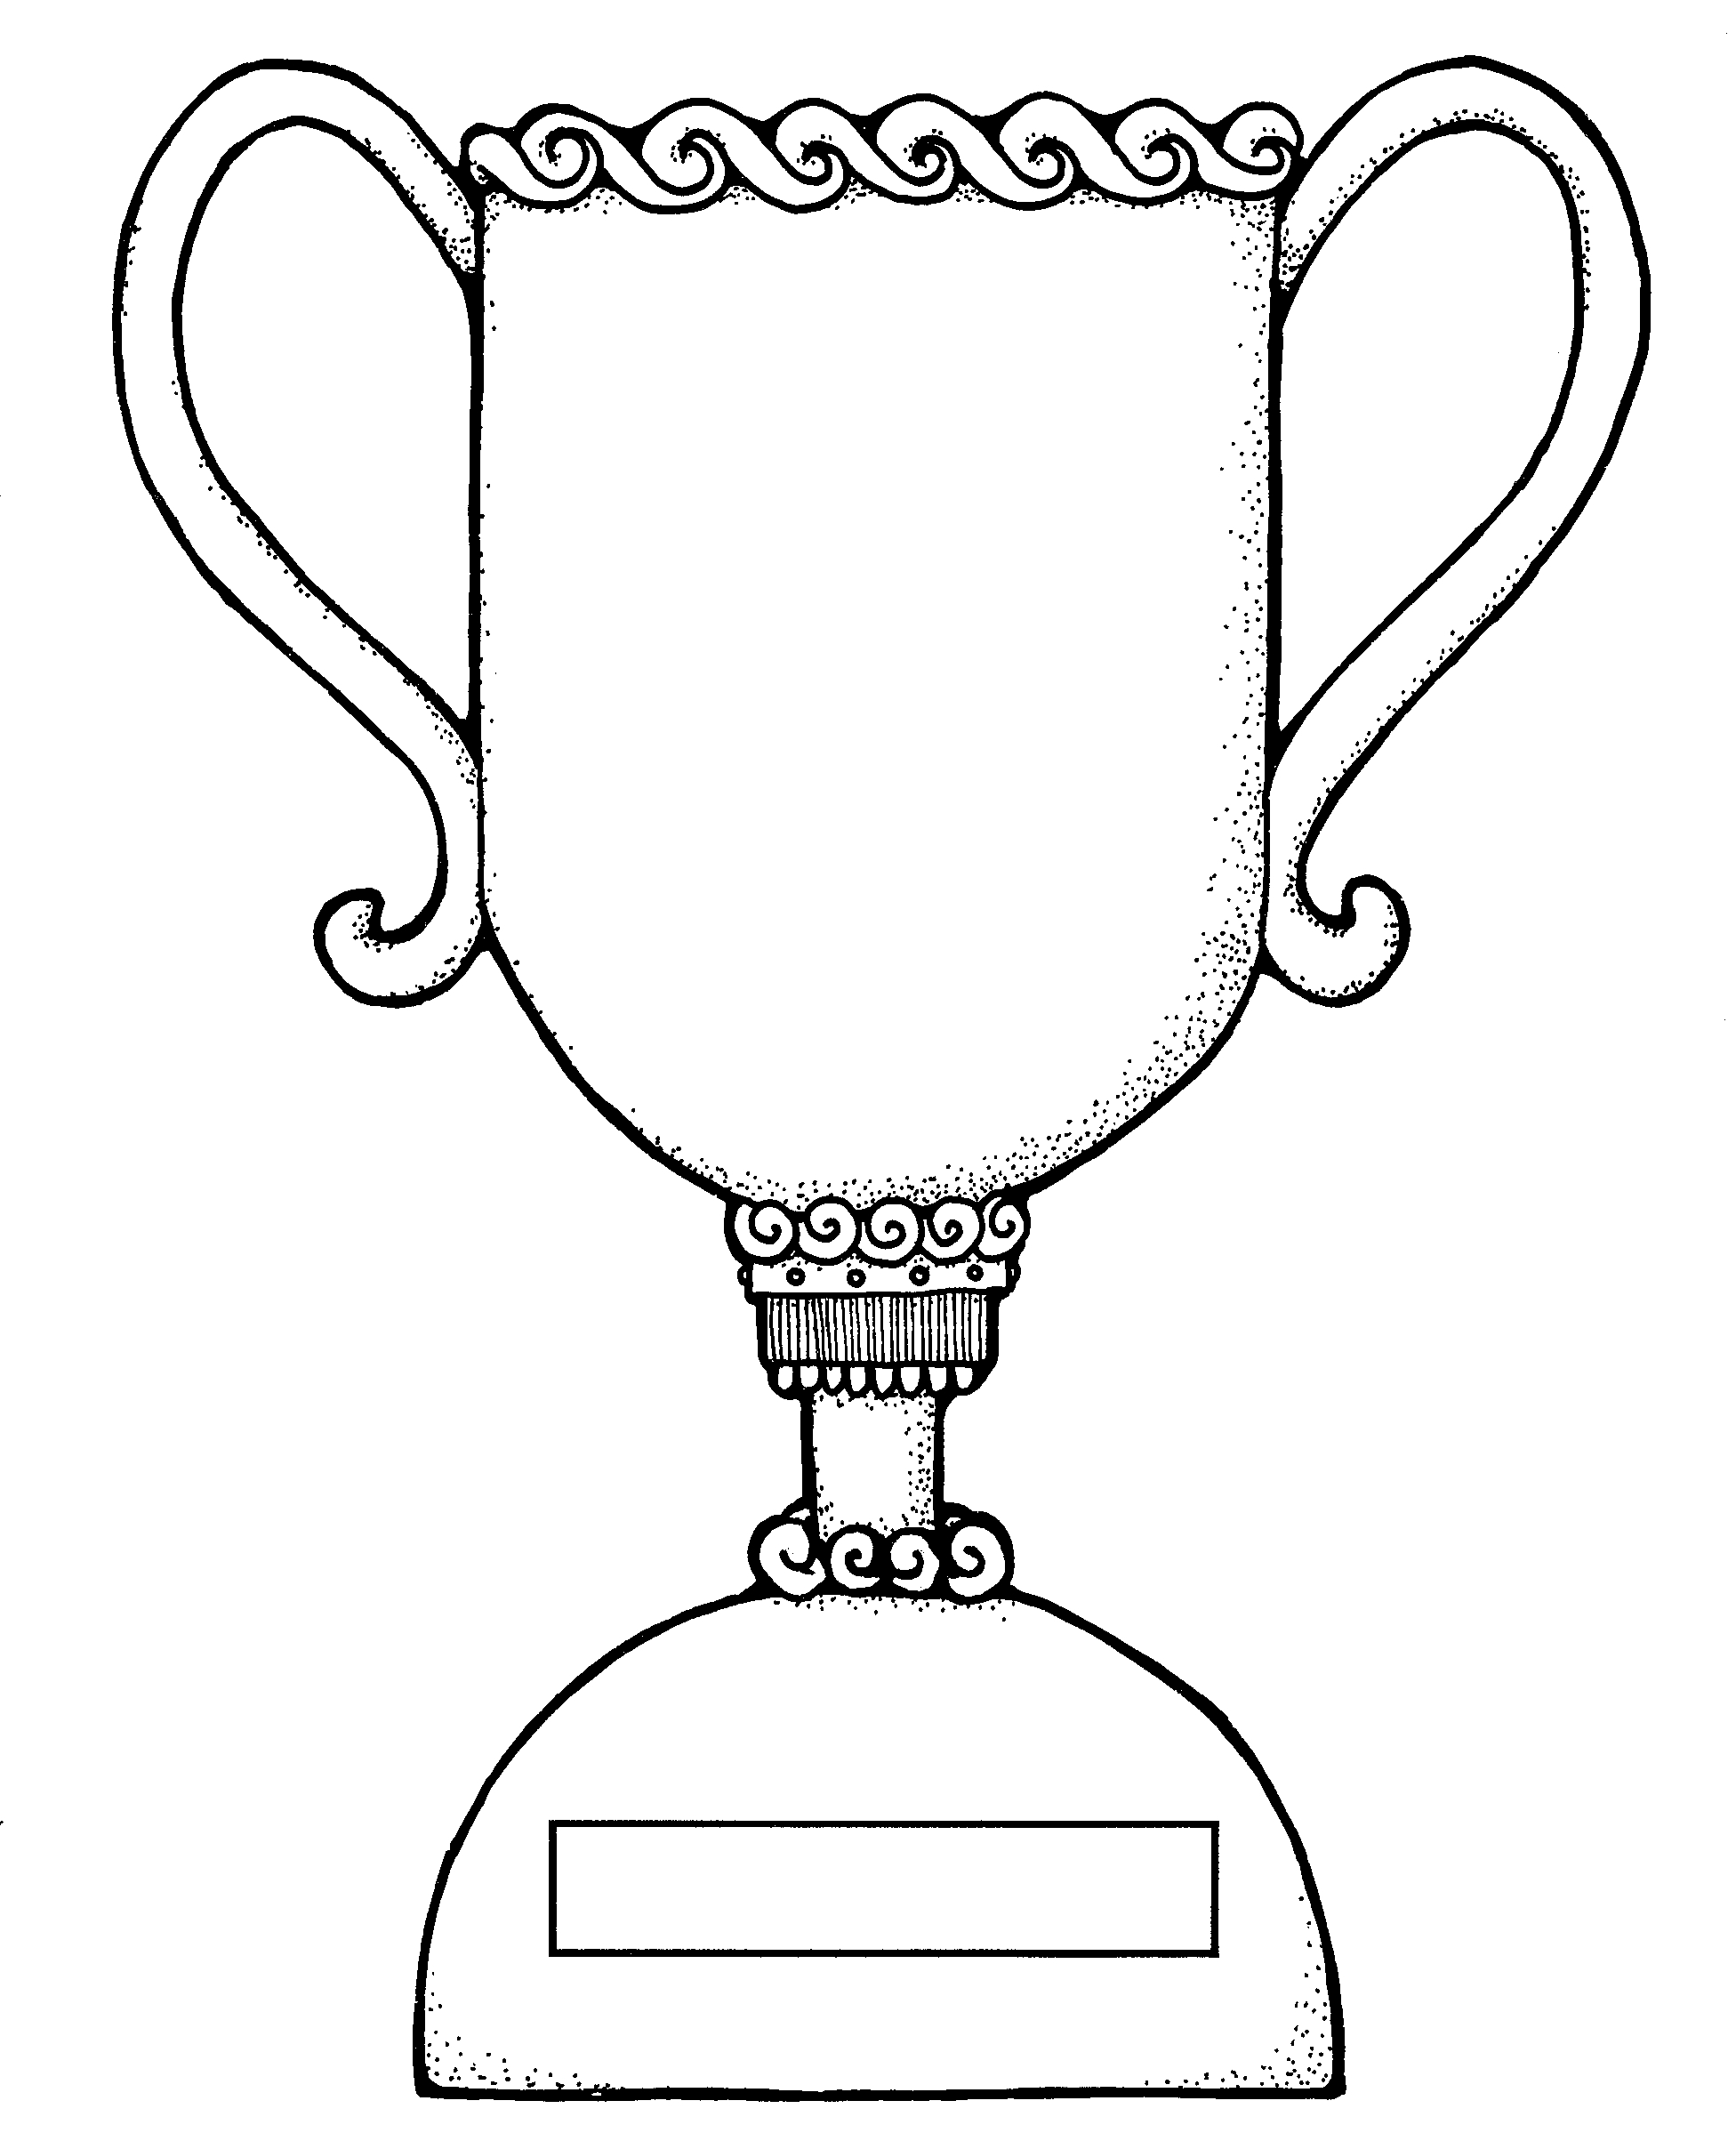 Free Sports Cup Cliparts, Download Free Clip Art, Free Clip.